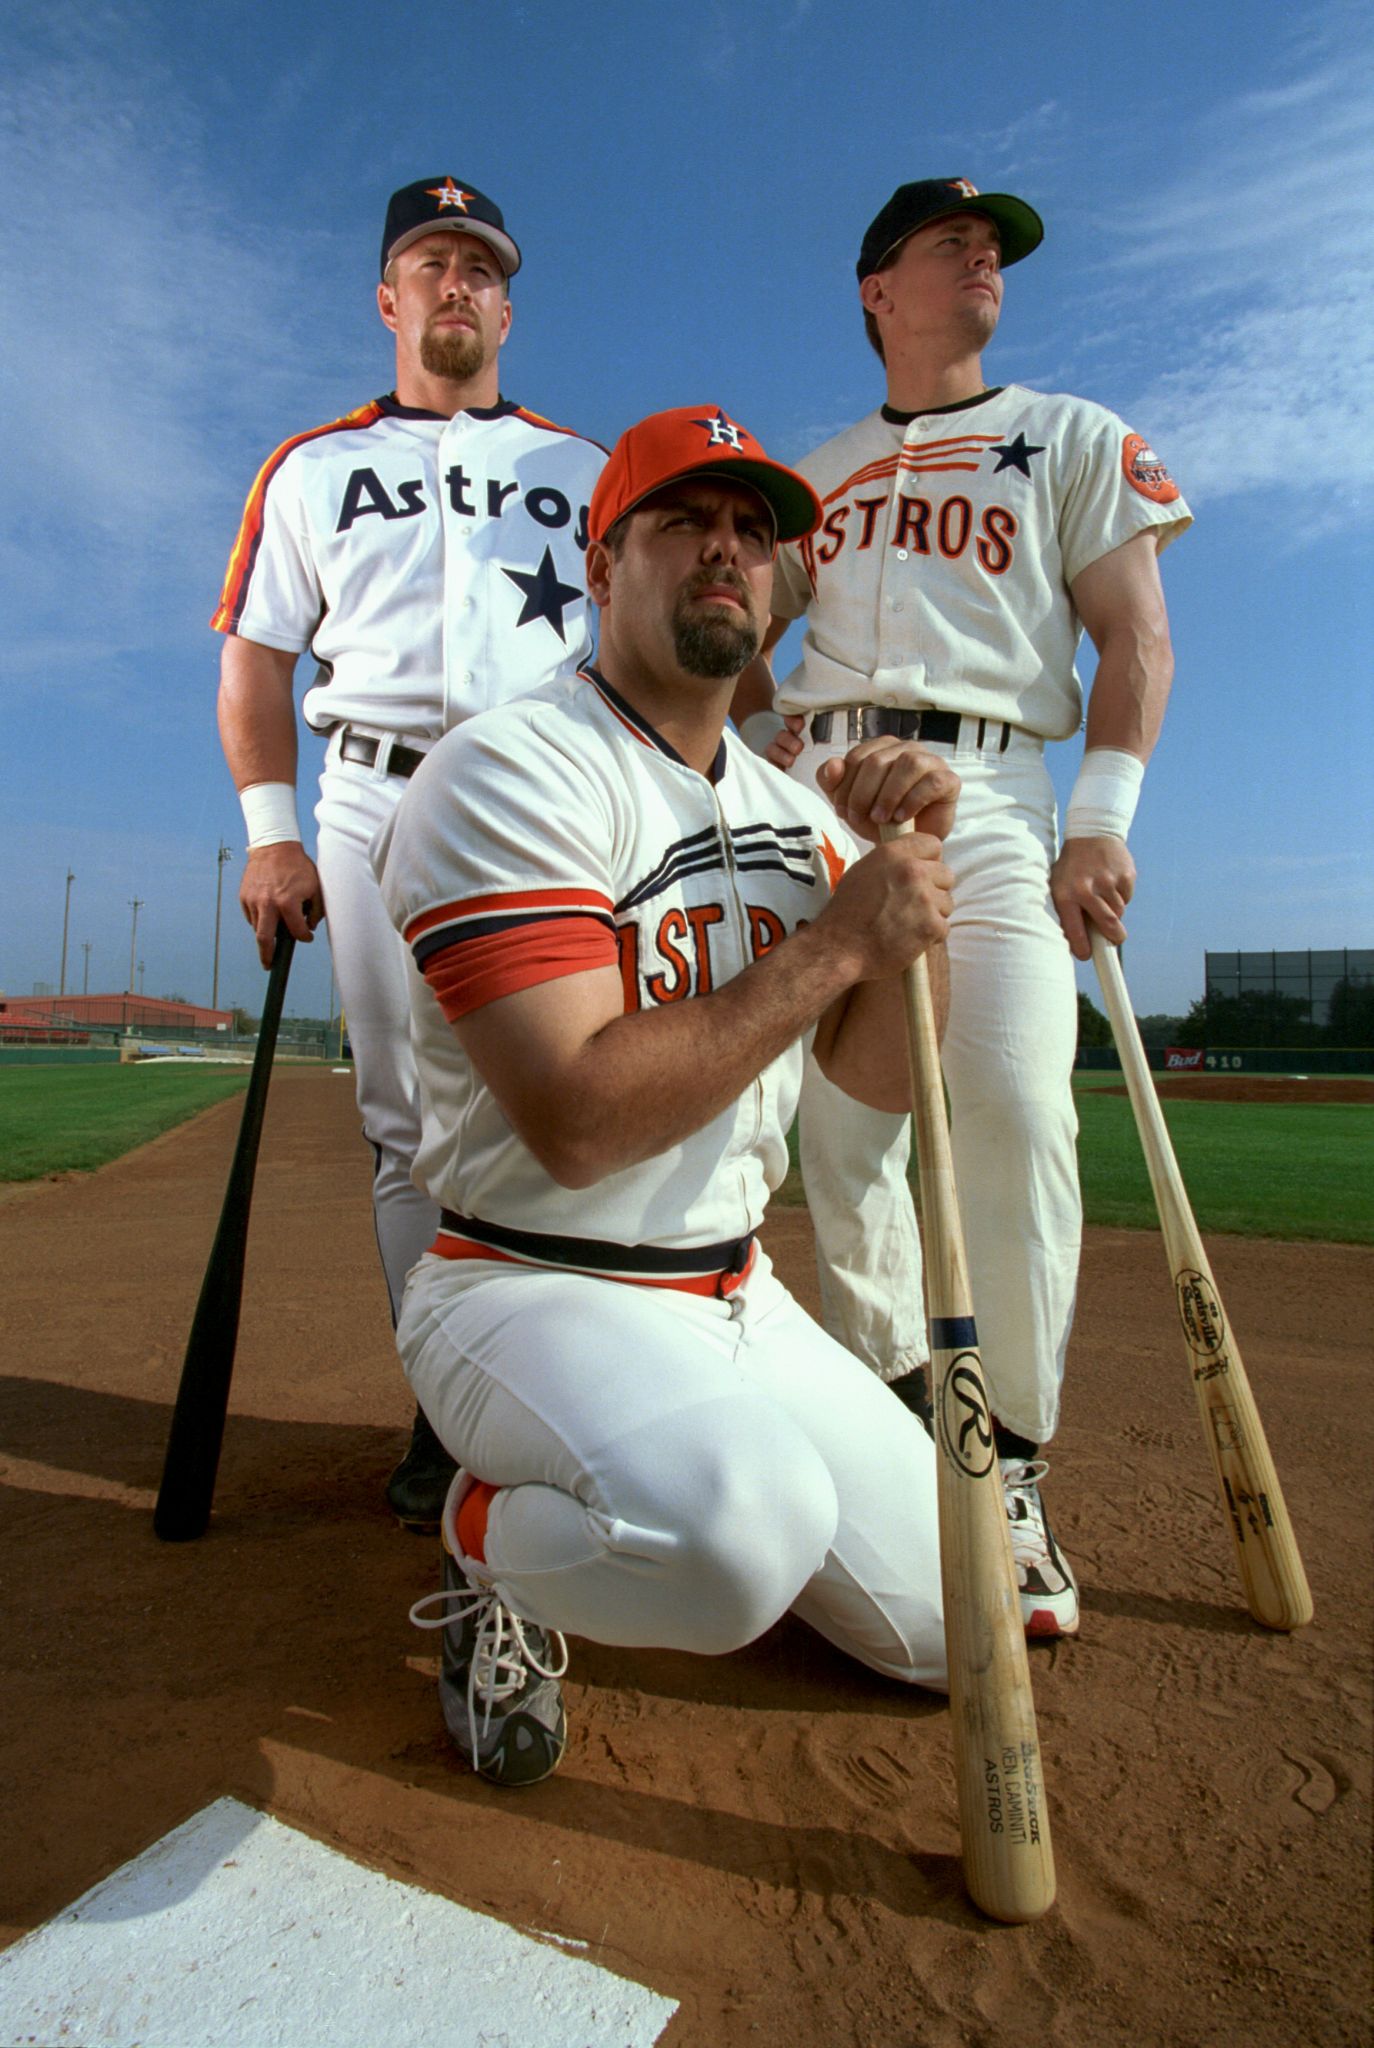 See what Houston Astros spring training looked like through the years